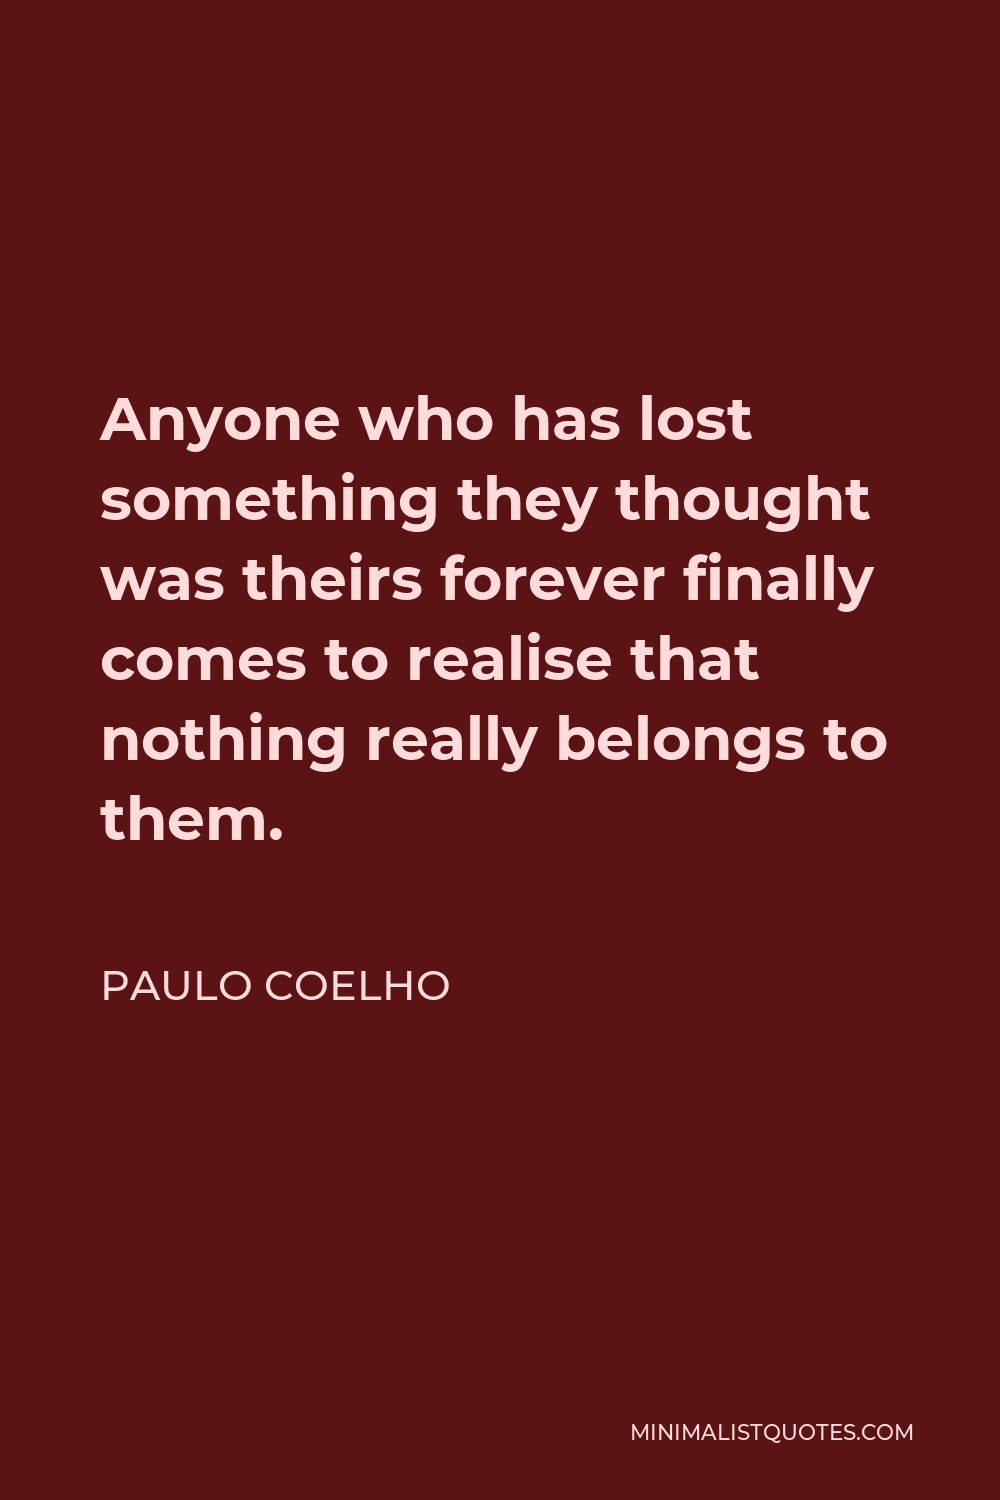 Paulo Coelho Quote - Anyone who has lost something they thought was theirs forever finally comes to realise that nothing really belongs to them.